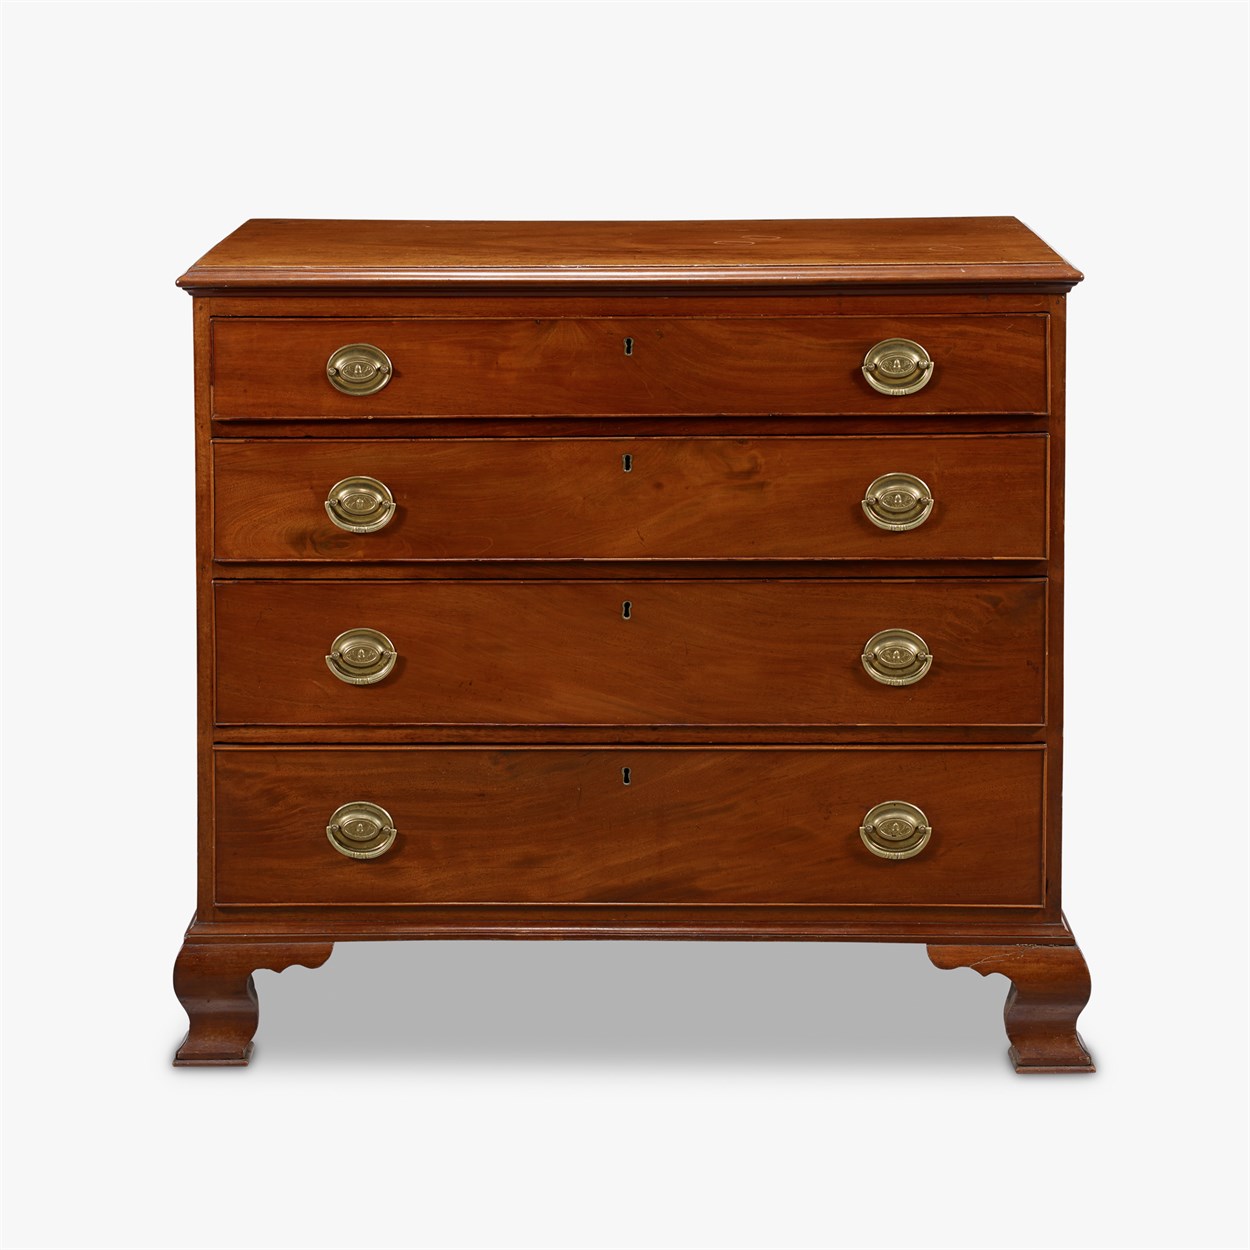 Lot 7 - Chippendale figured walnut chest of drawers